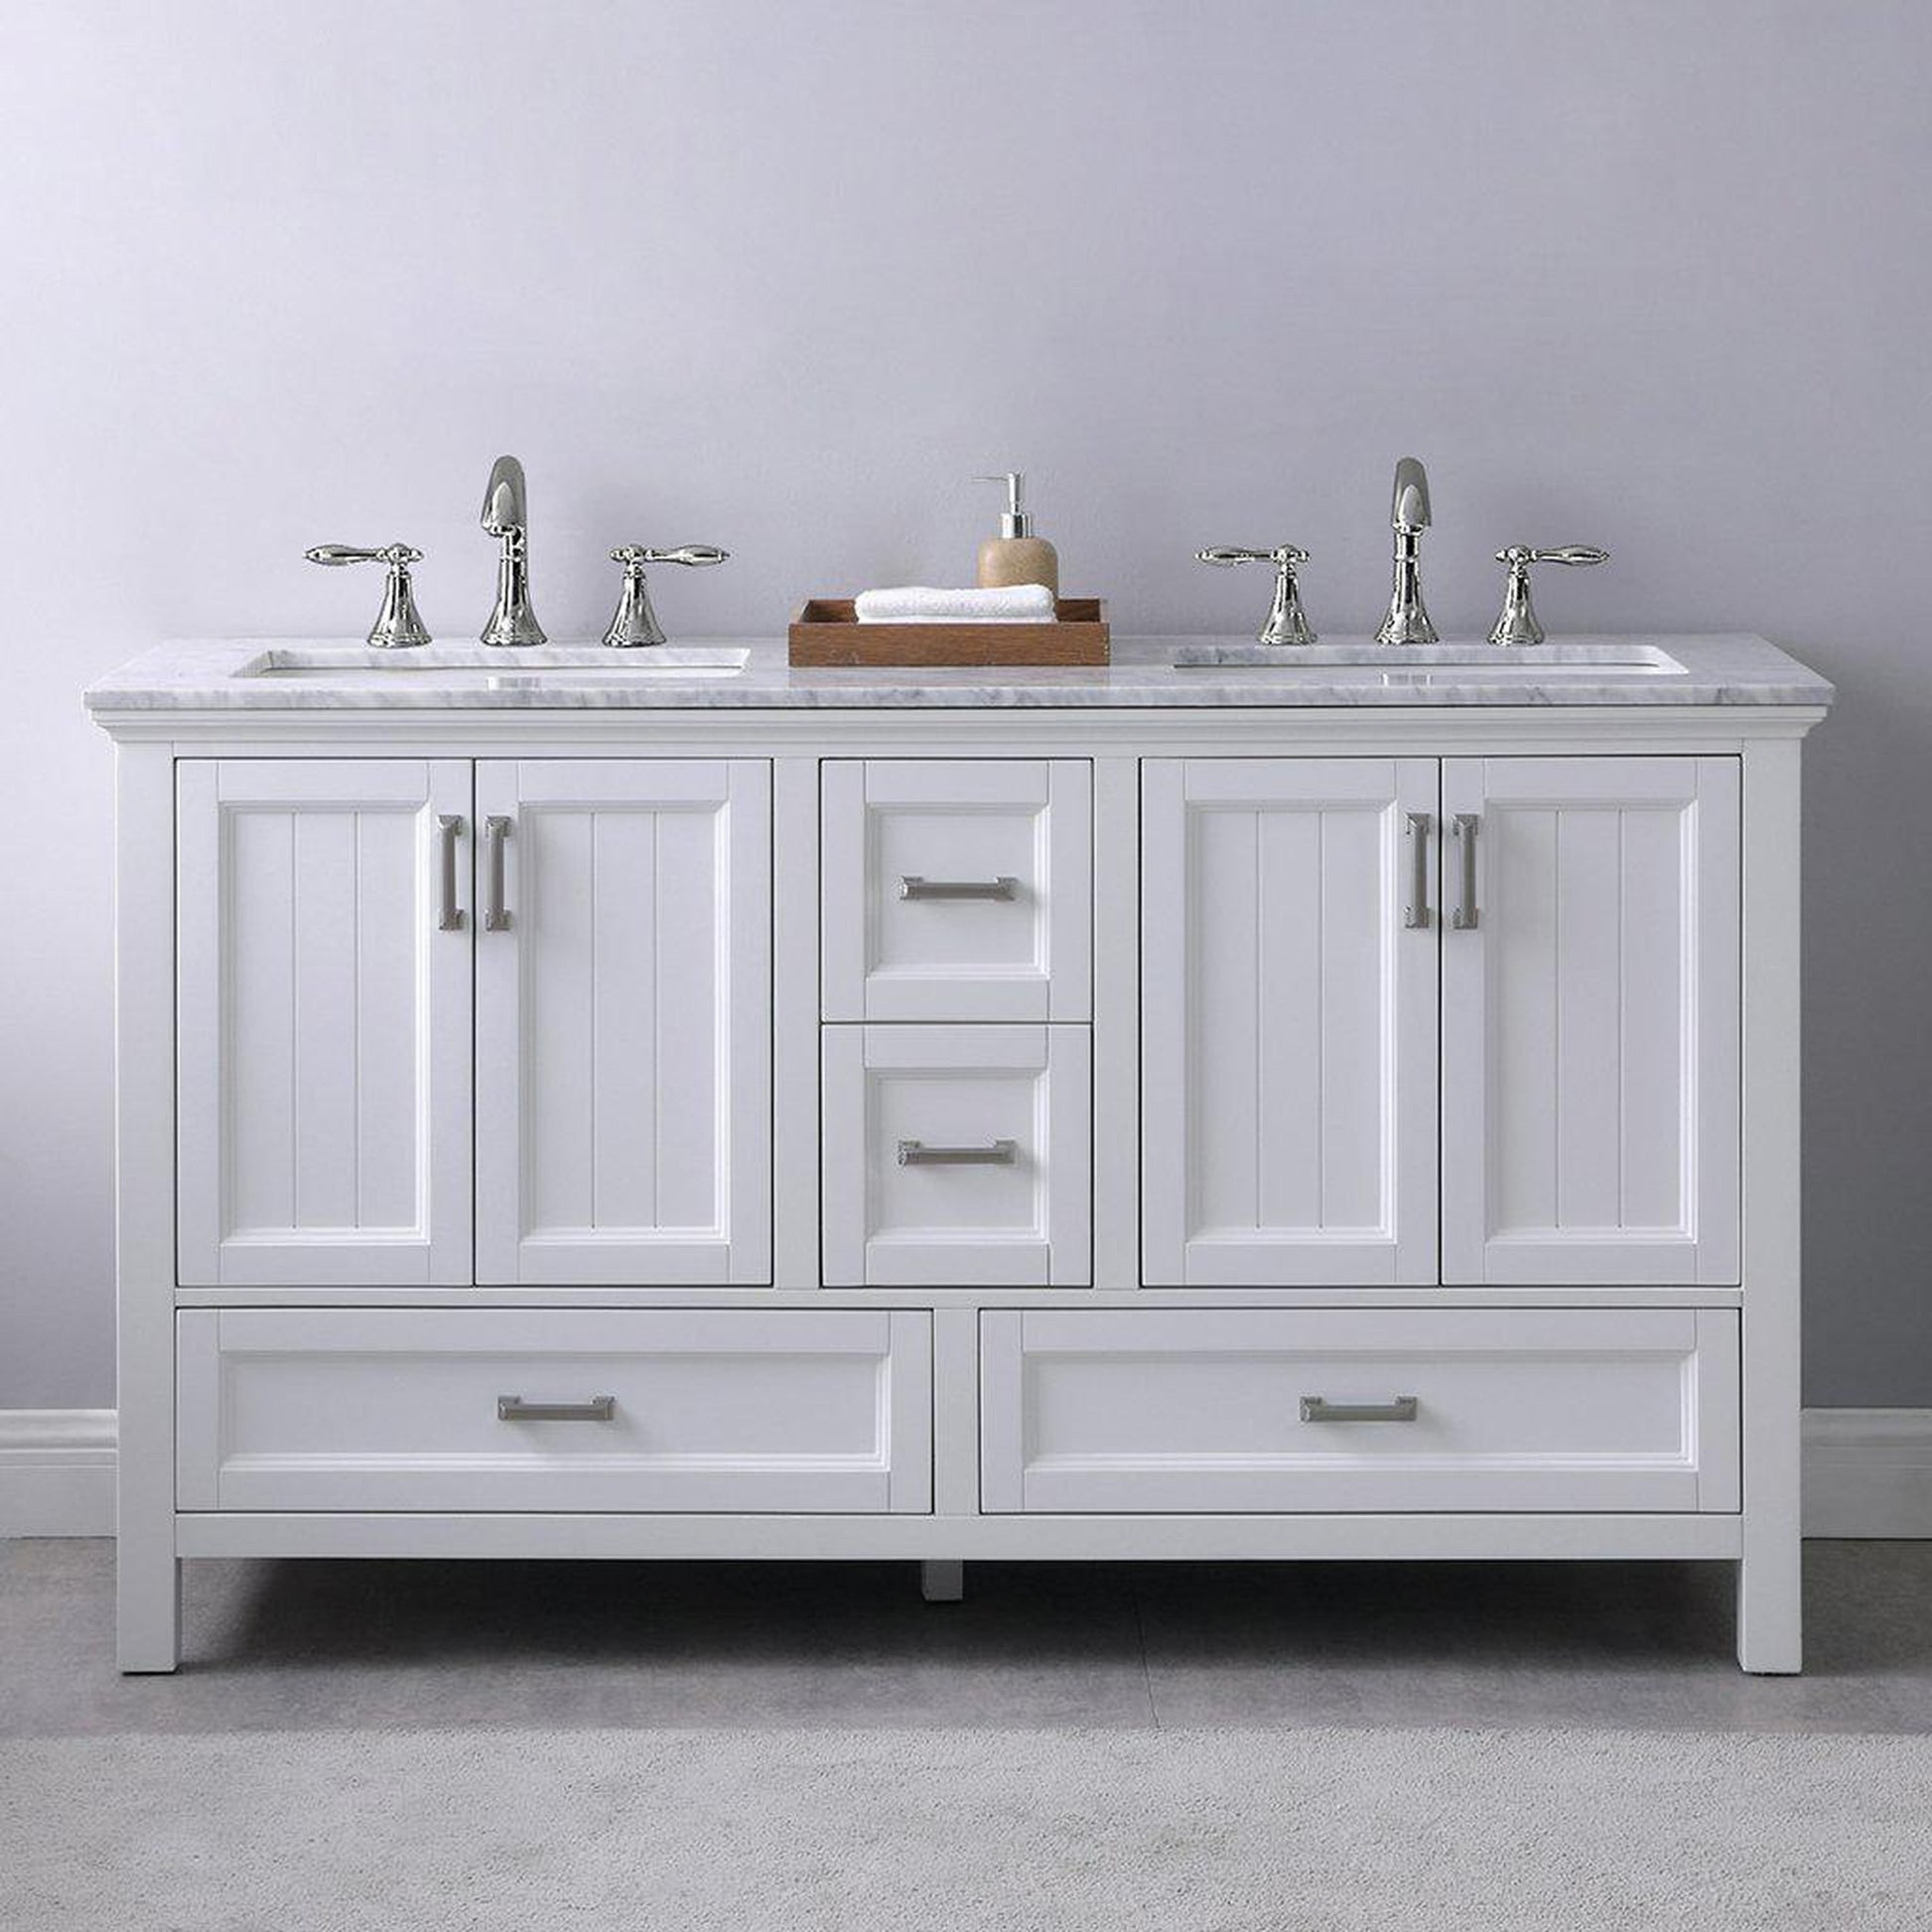 Altair Isla 60" Double White Freestanding Bathroom Vanity Set With Natural Carrara White Marble Top, Two Rectangular Undermount Ceramic Sinks, and Overflow